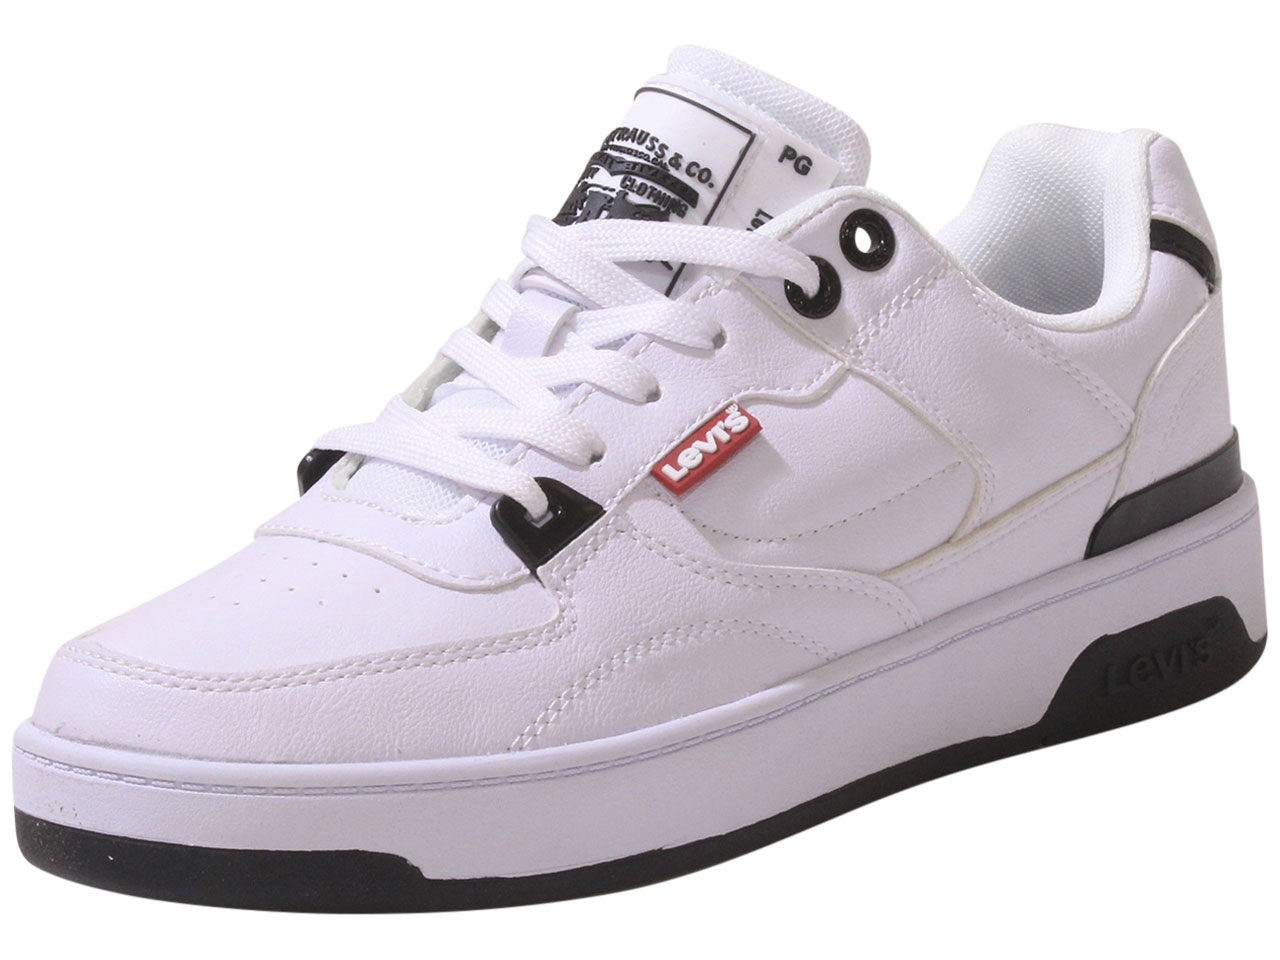 UPC 191605781040 product image for Levi's Men's 521 Mod LO Pebbled UL Sneakers Low Top White/Black Sz: 13 519714 -  | upcitemdb.com